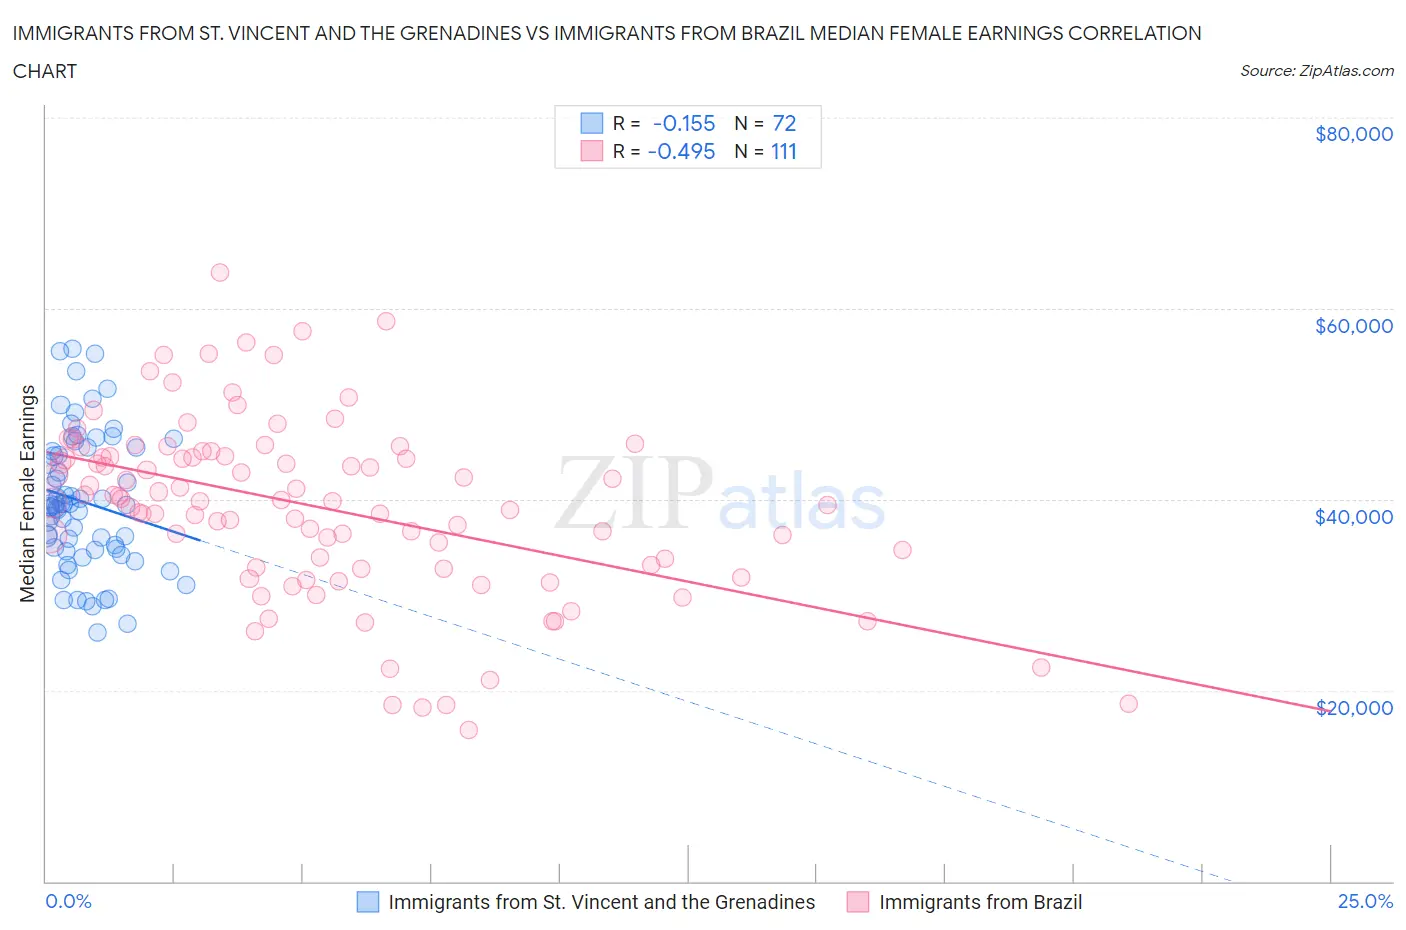 Immigrants from St. Vincent and the Grenadines vs Immigrants from Brazil Median Female Earnings